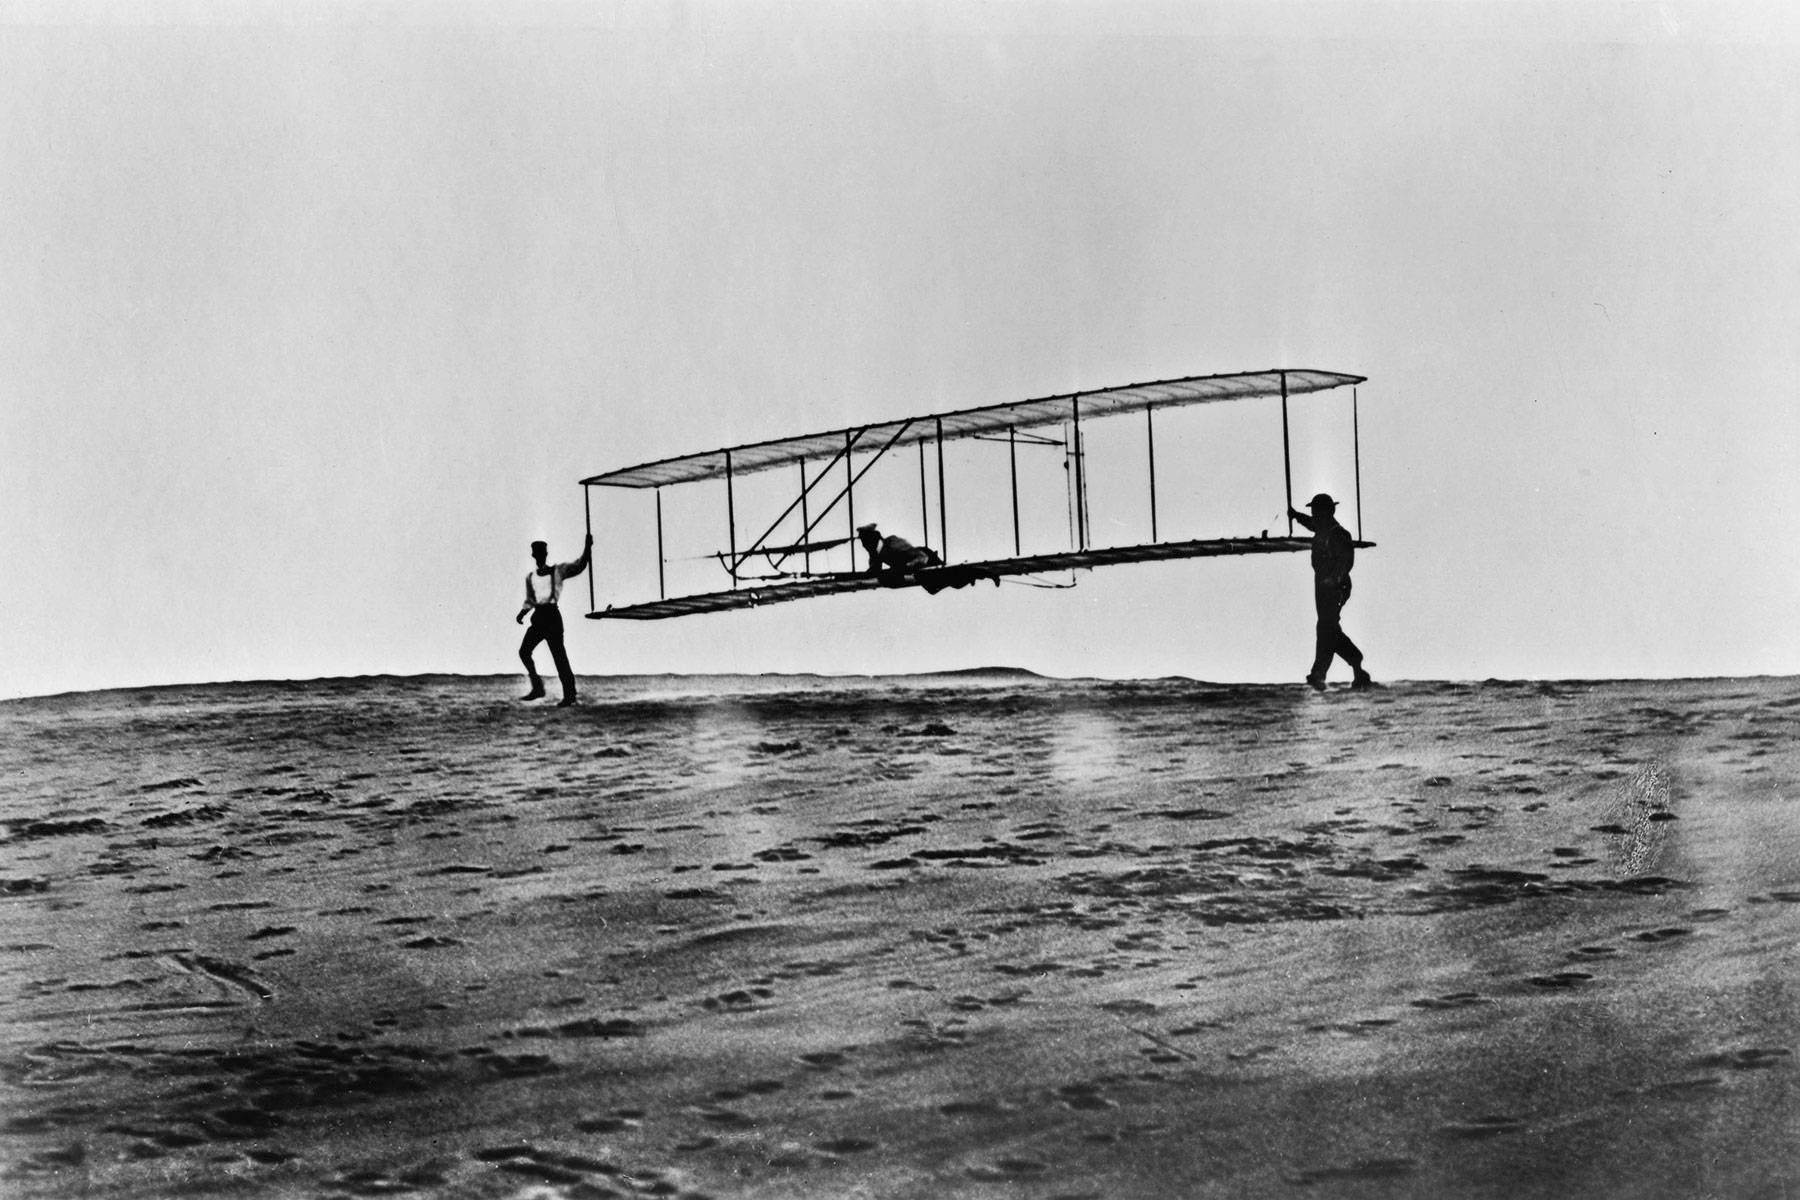 Glider being launched